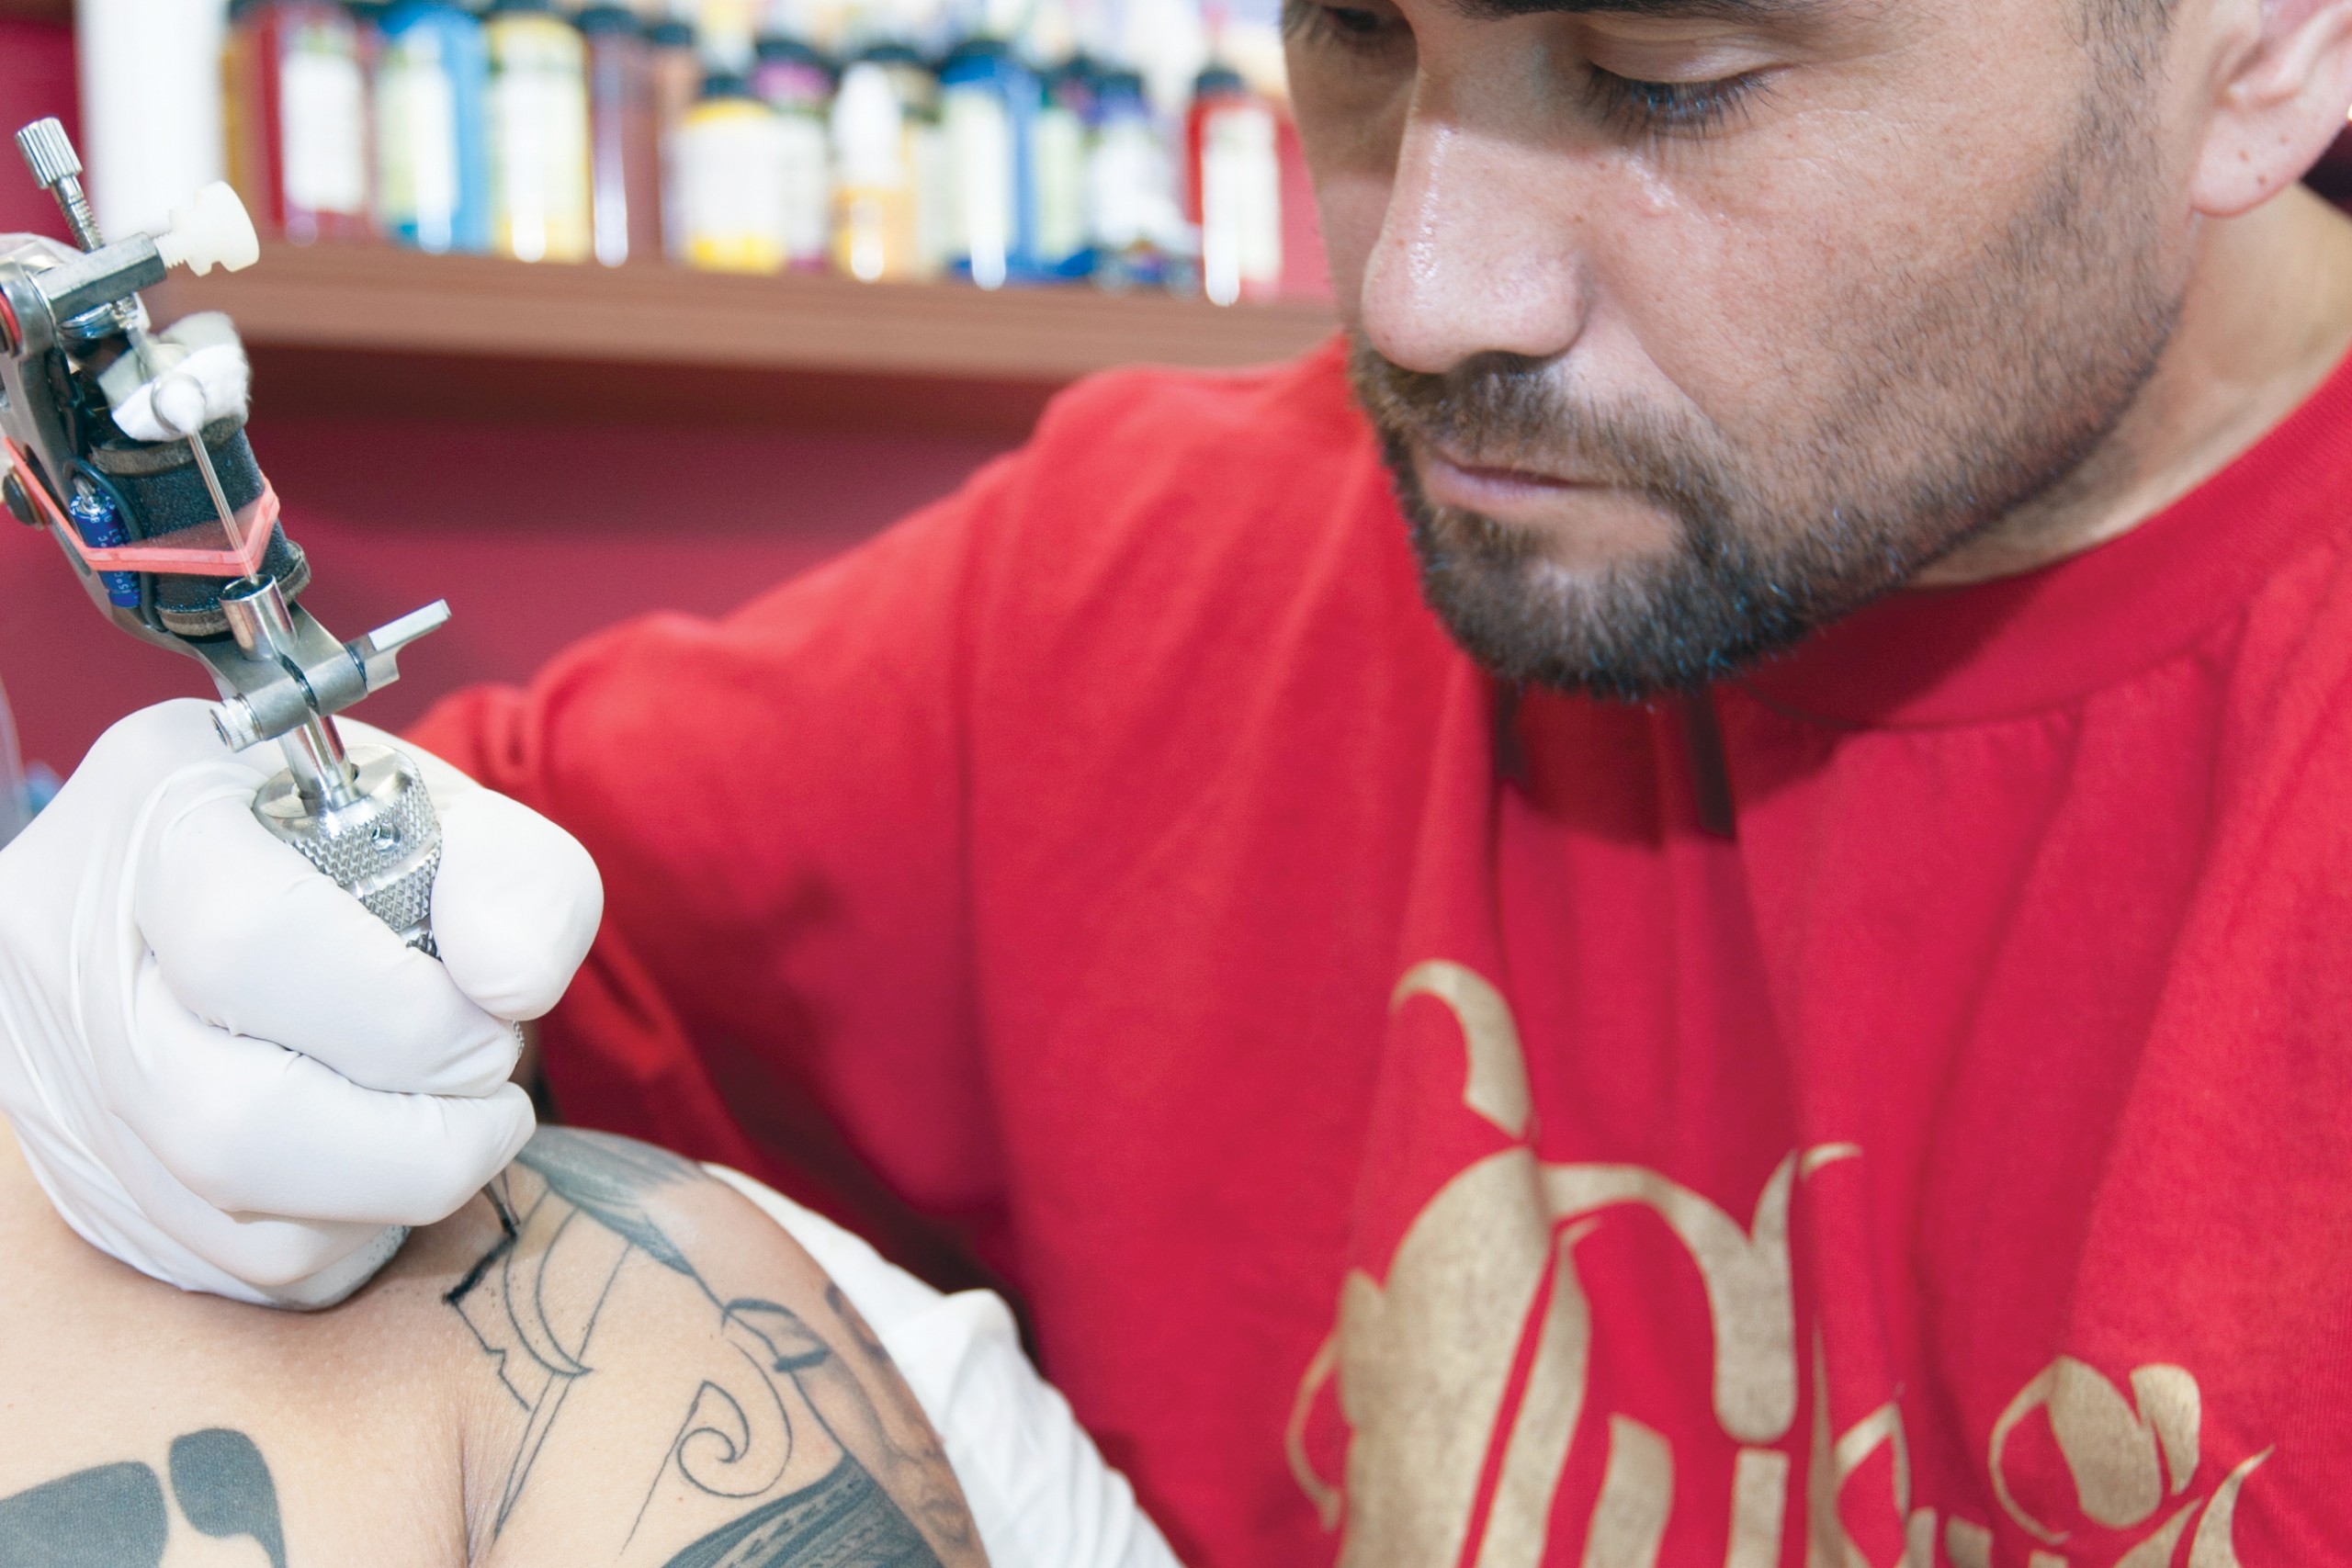 How to Become a Tattoo Artist | The Art of Manliness